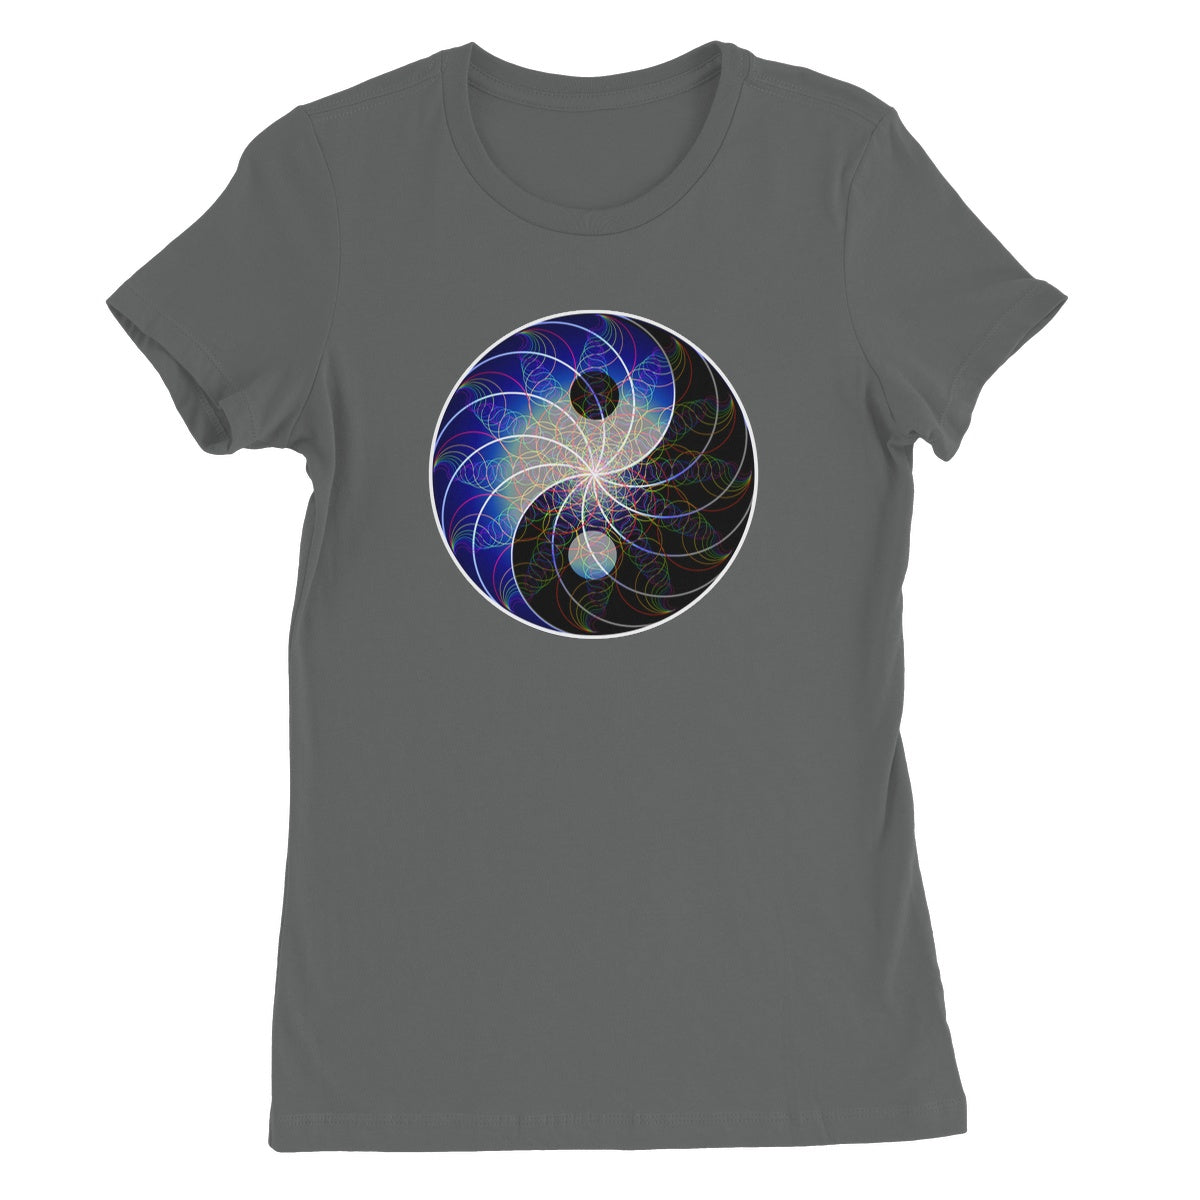 In Darkness there is Light Women's Favourite T-Shirt